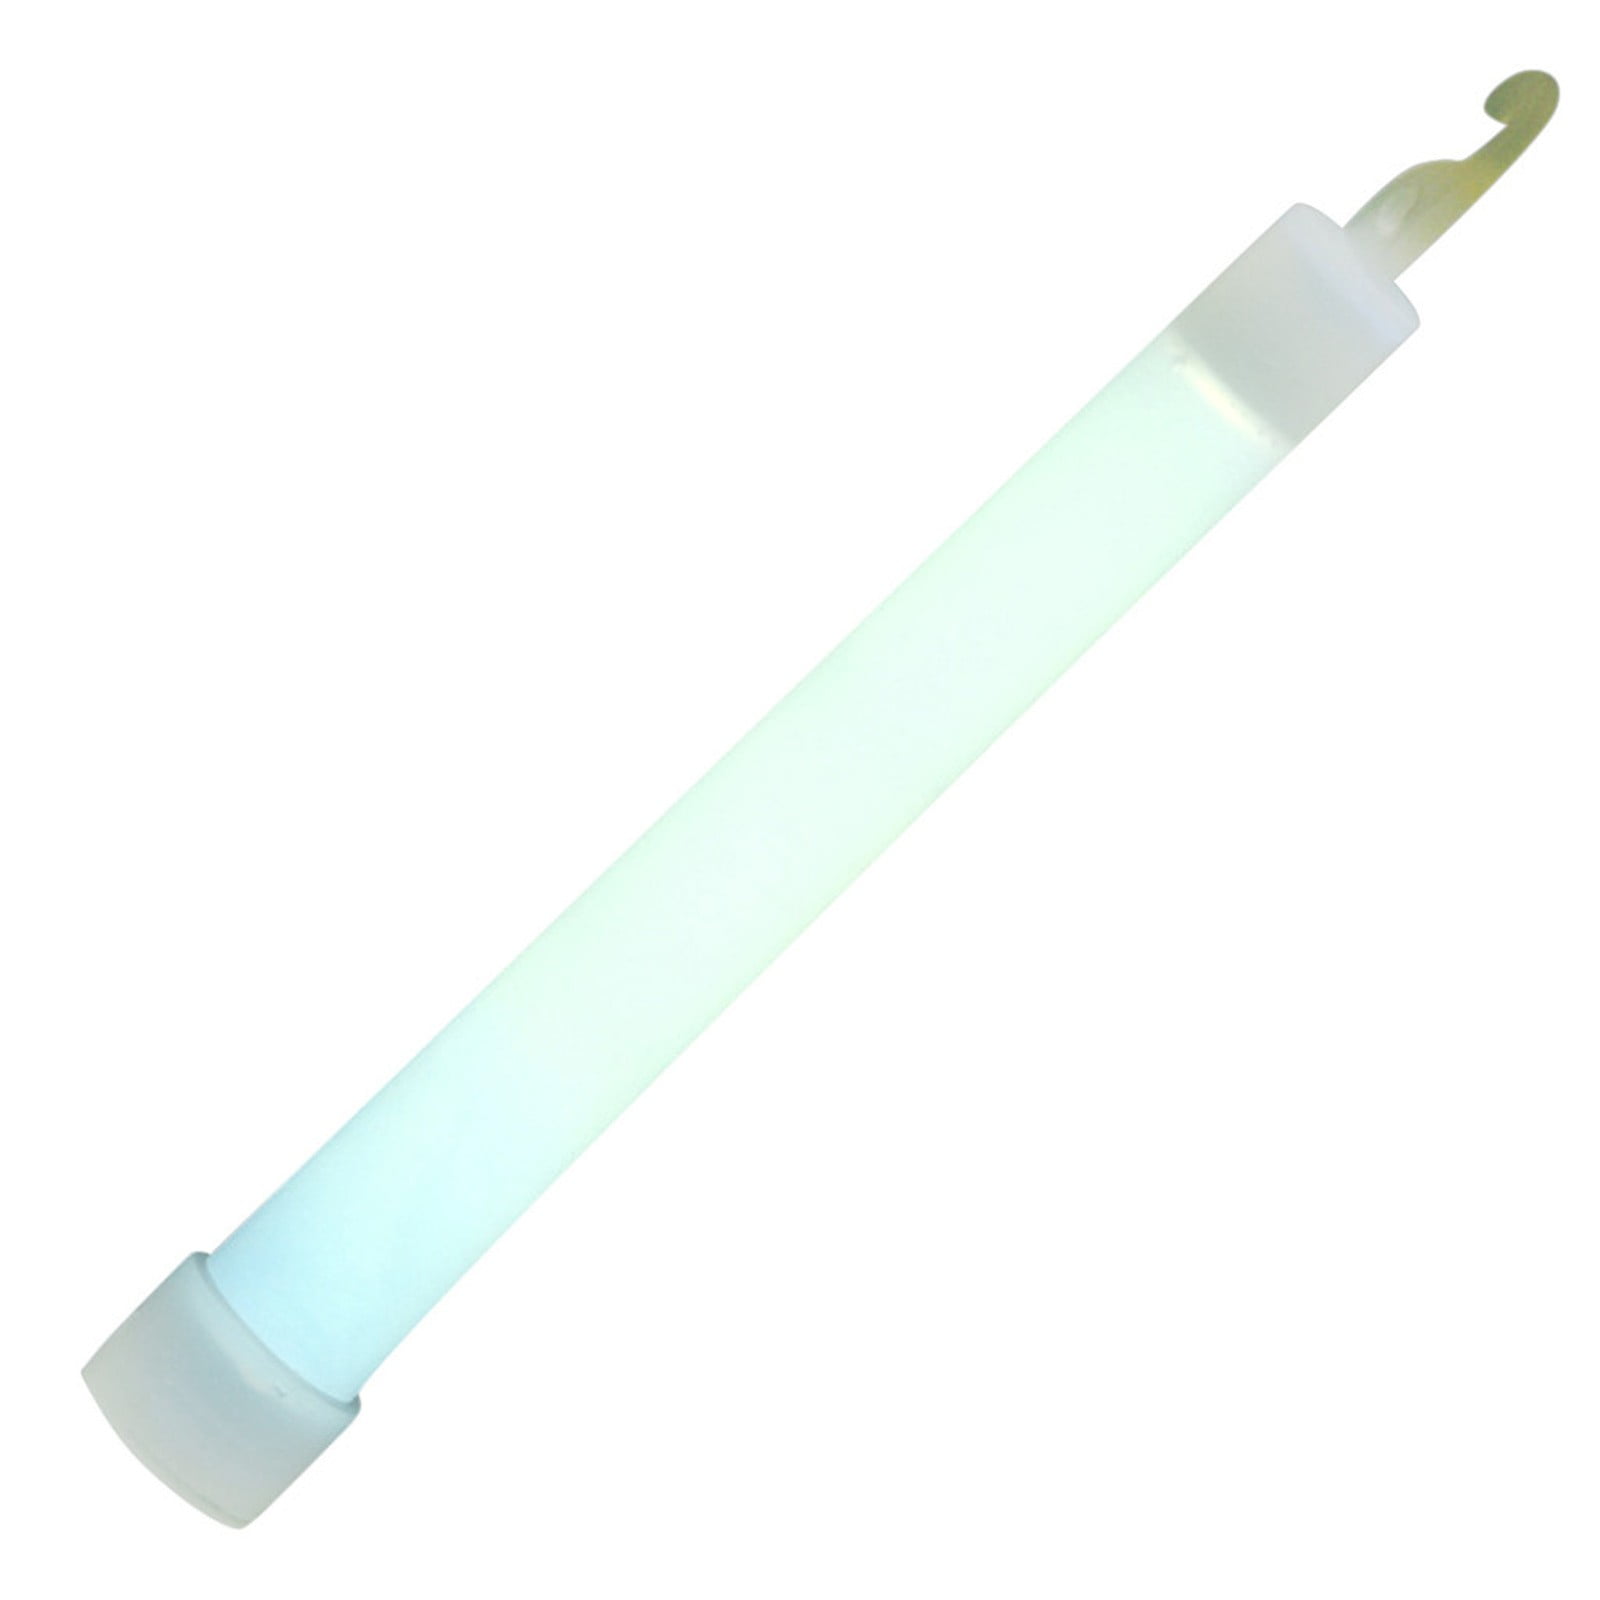 6 INCH INDESTRUCTIBLE + 100% REUSABLE Glowstick, Super Bright + Completely  Safe